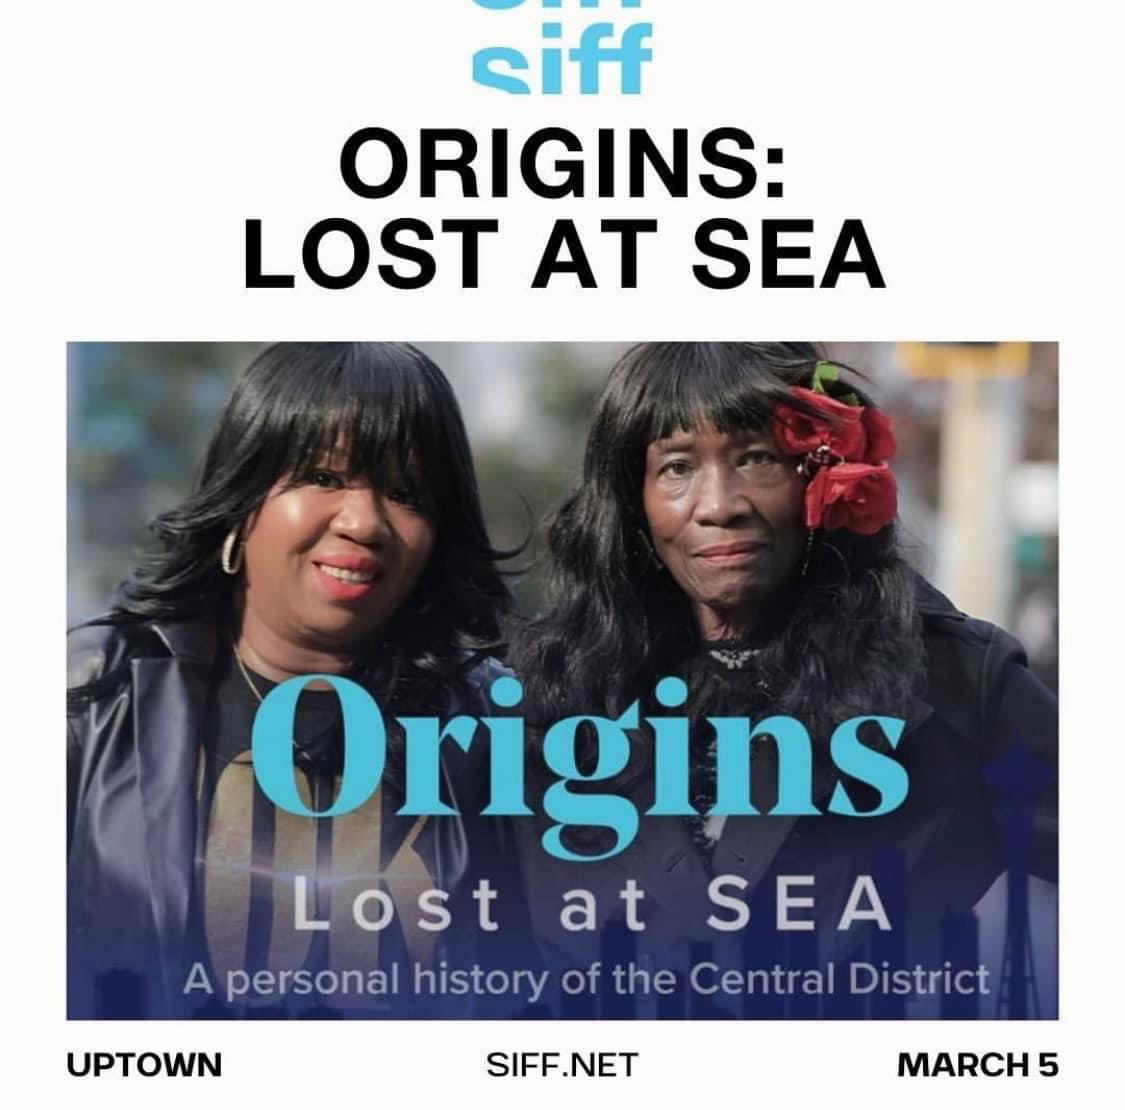 LAST CALL FOR MEDIA THAT WOULD LIKE TO COVER THE LOST AT SEA SCREENING TONIGHT | DM OR EMAIL FOR DETAILS:

📌 ladyscribe@sremediagroup.com 

#seattle #seattlemedia #crosscut #kcts9 #pbs #siff #komo4 #kiro7 #king5 #q13fox #seattlemagazine #thestranger #seattleblogs #seattleevents